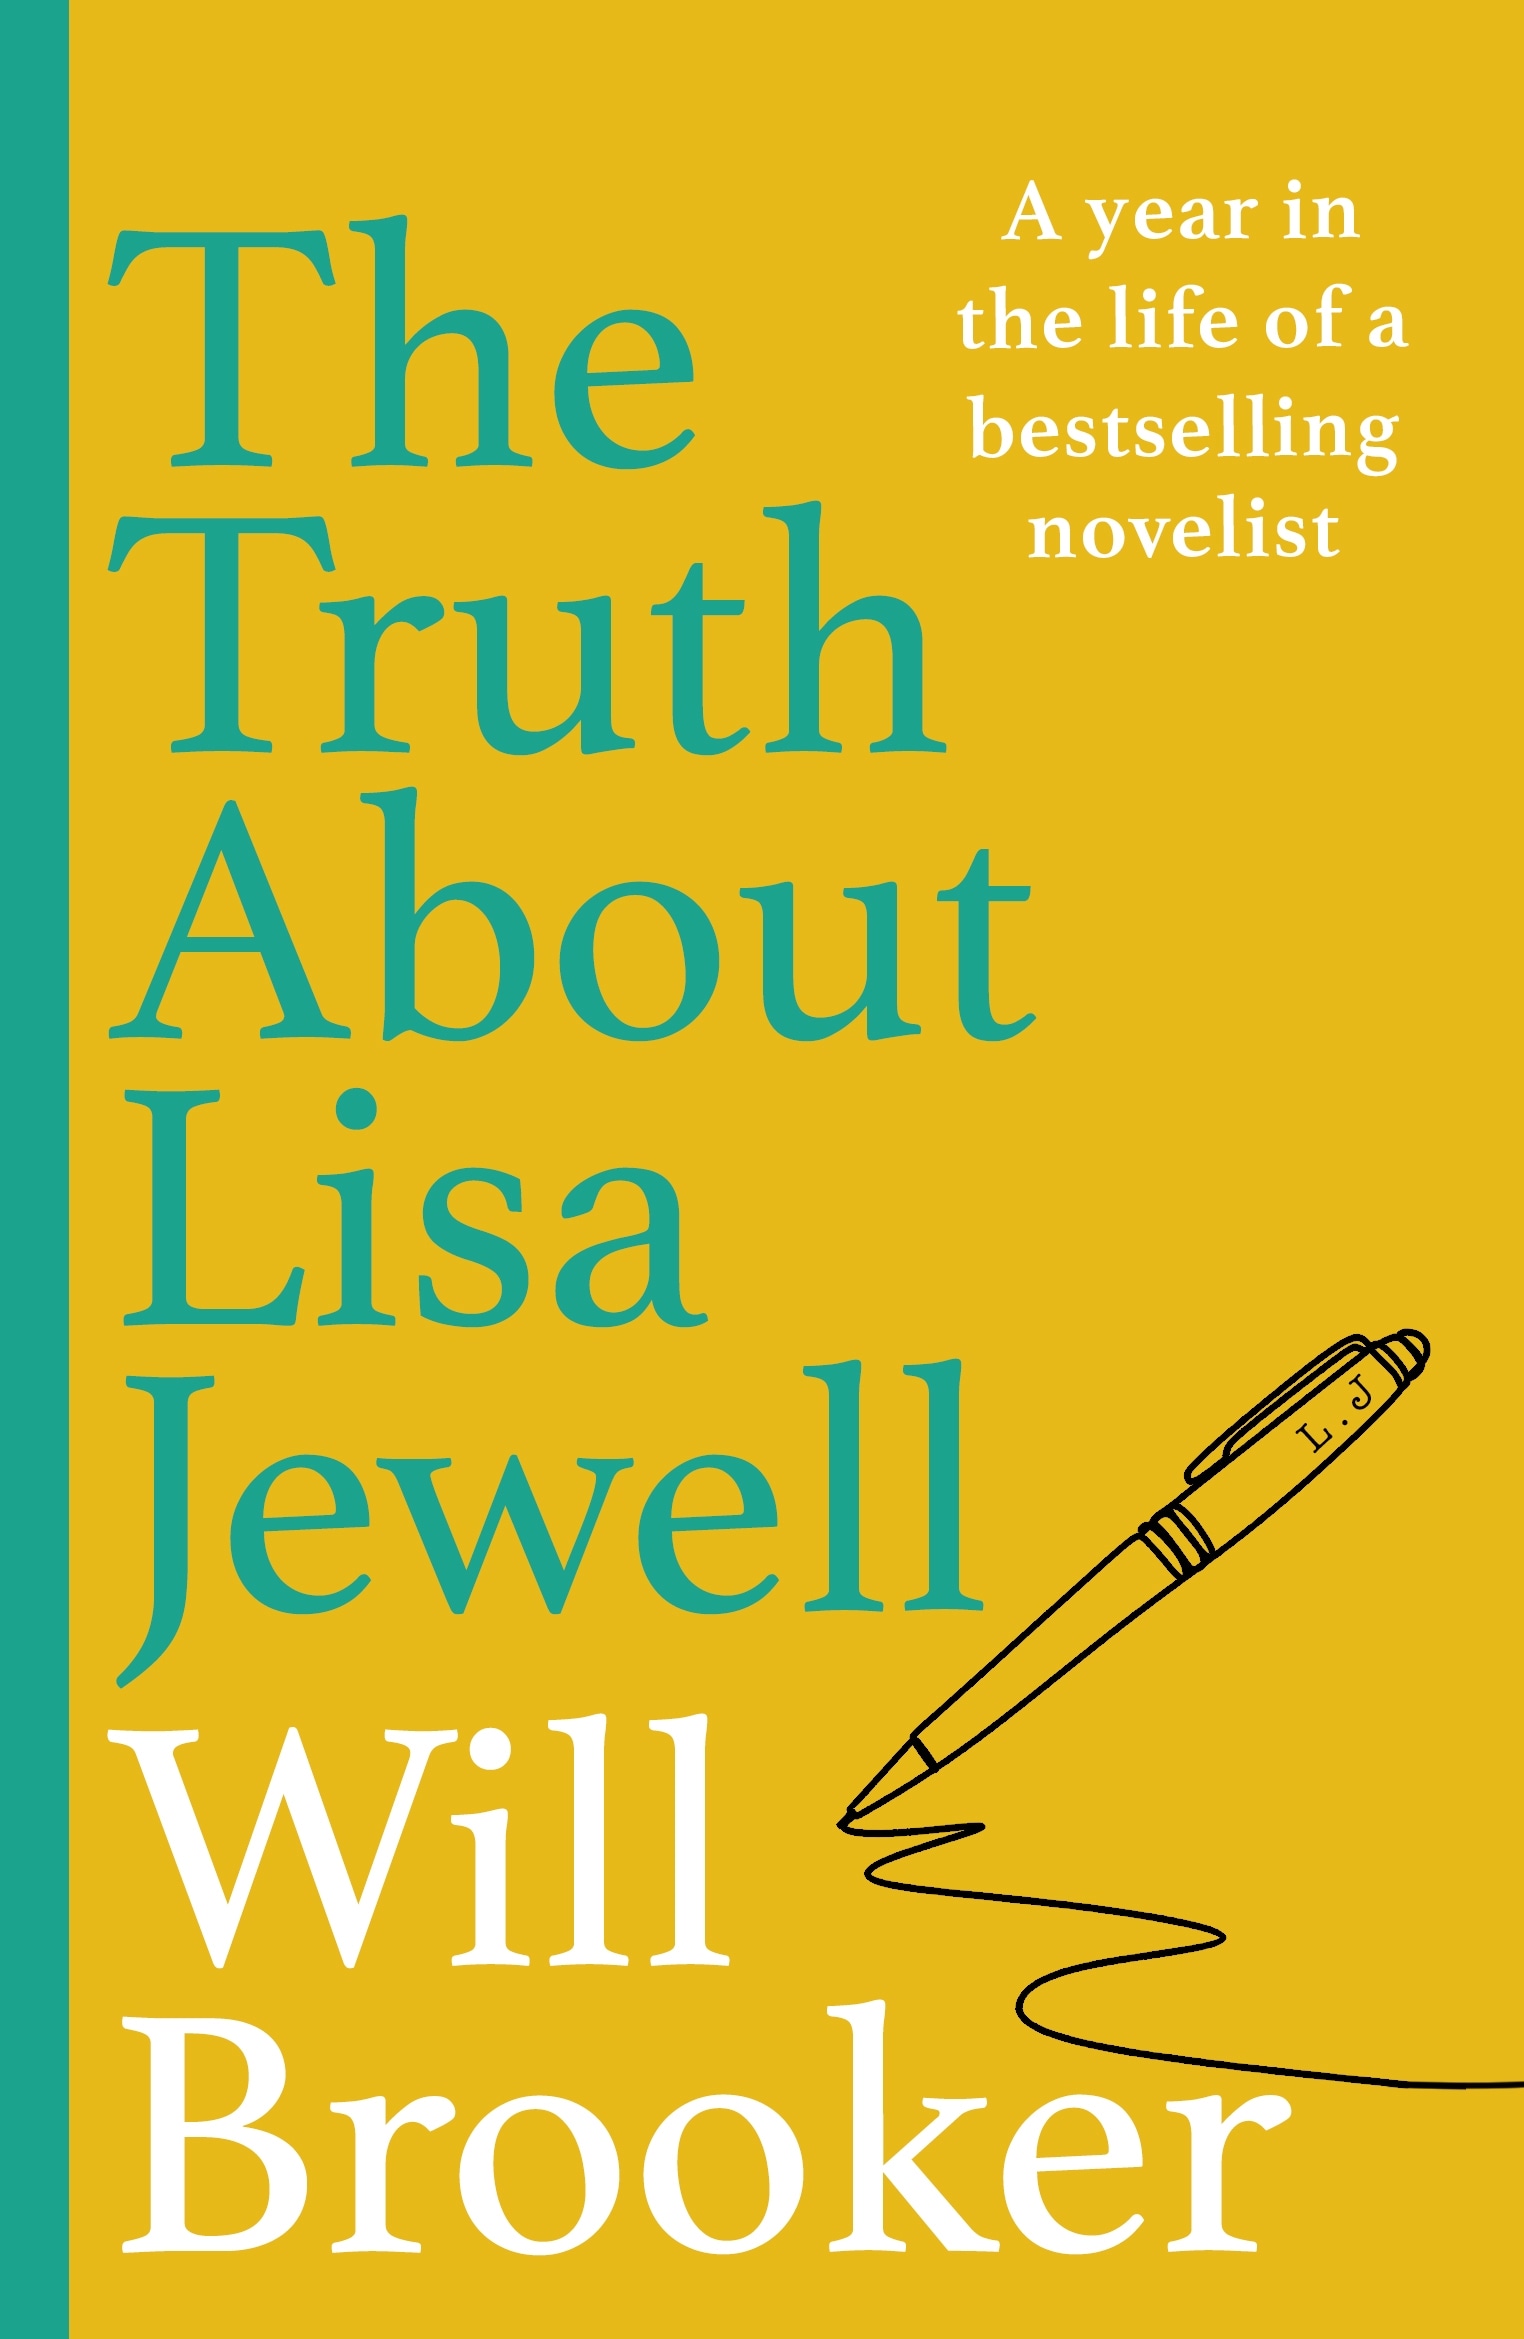 Book “The Truth About Lisa Jewell” by Will Brooker — June 9, 2022